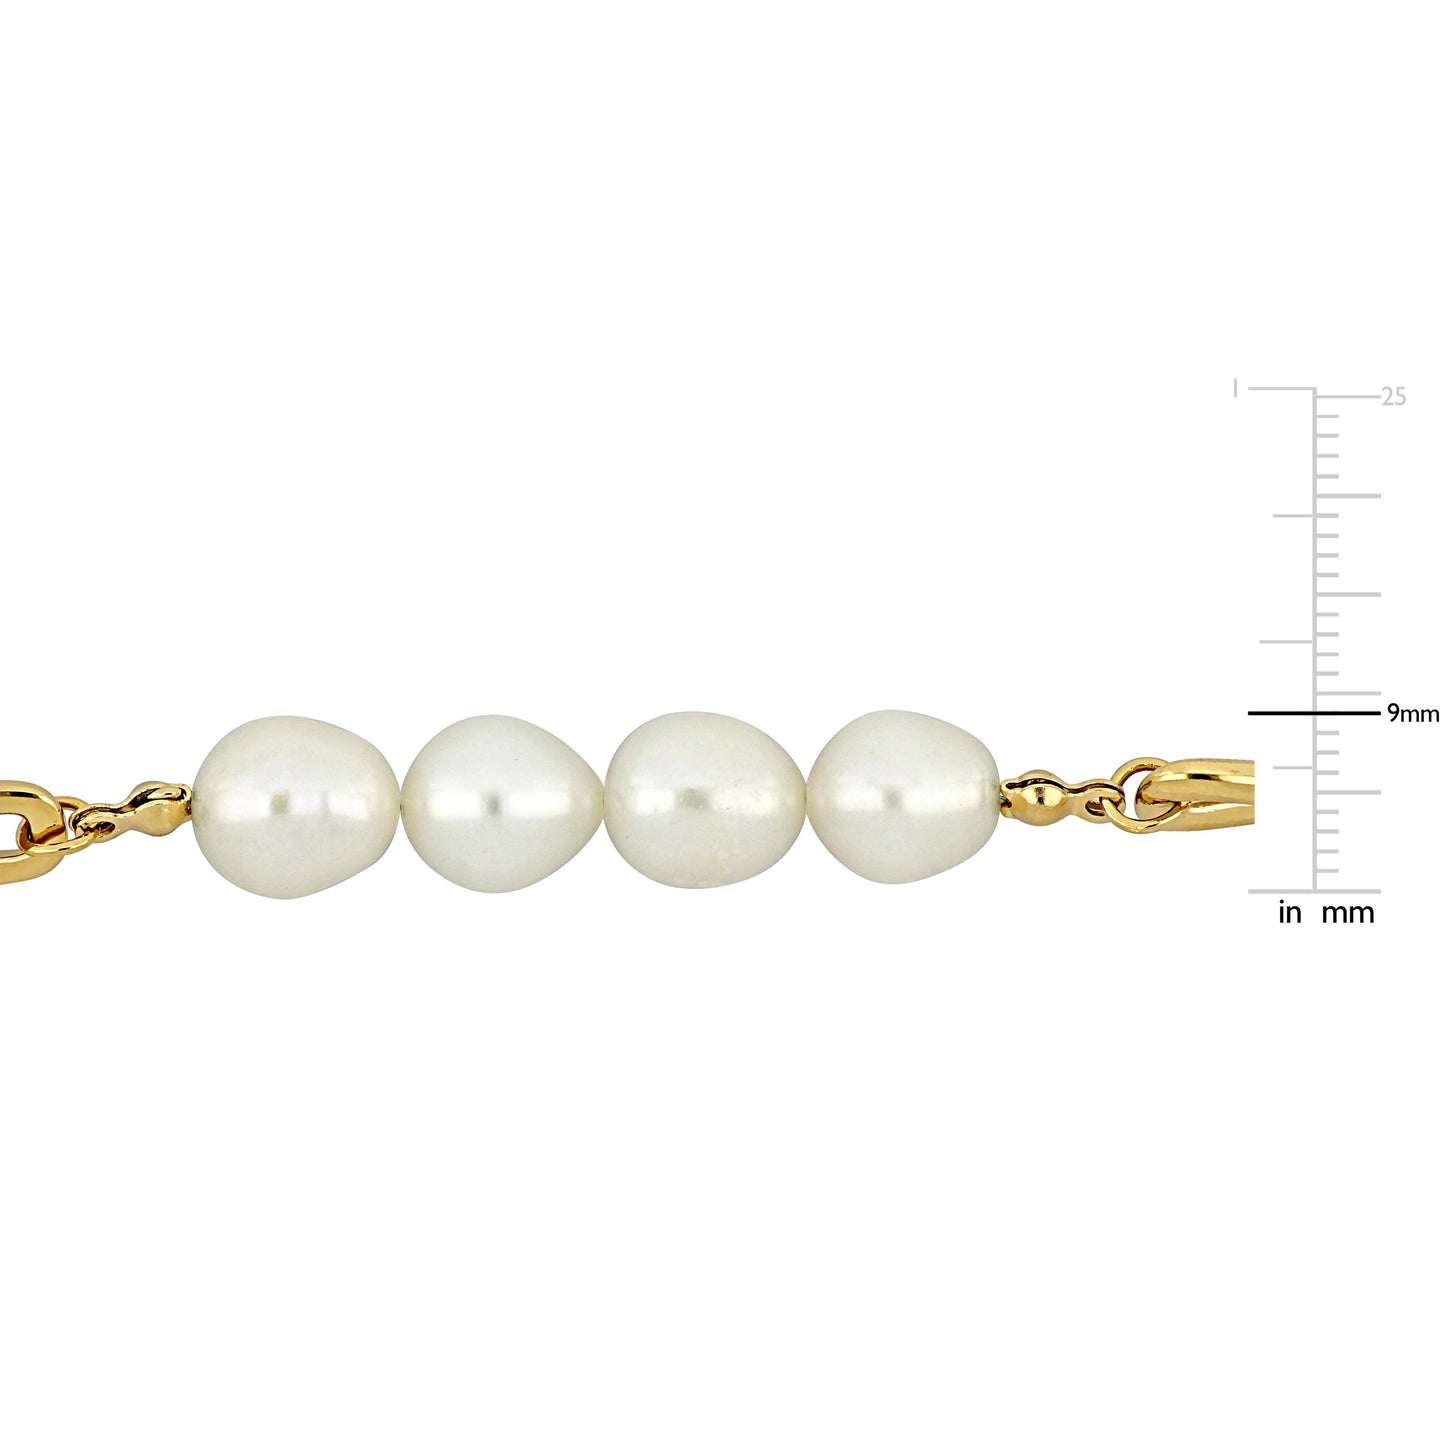 Silver Yellow 9 - 9.5 mm Freshwater Cultured Pearl Bracelet and 5-5.5mm FW drop on extention + twisted oval links w/ lobster clasp Length (inches): 7+2extender